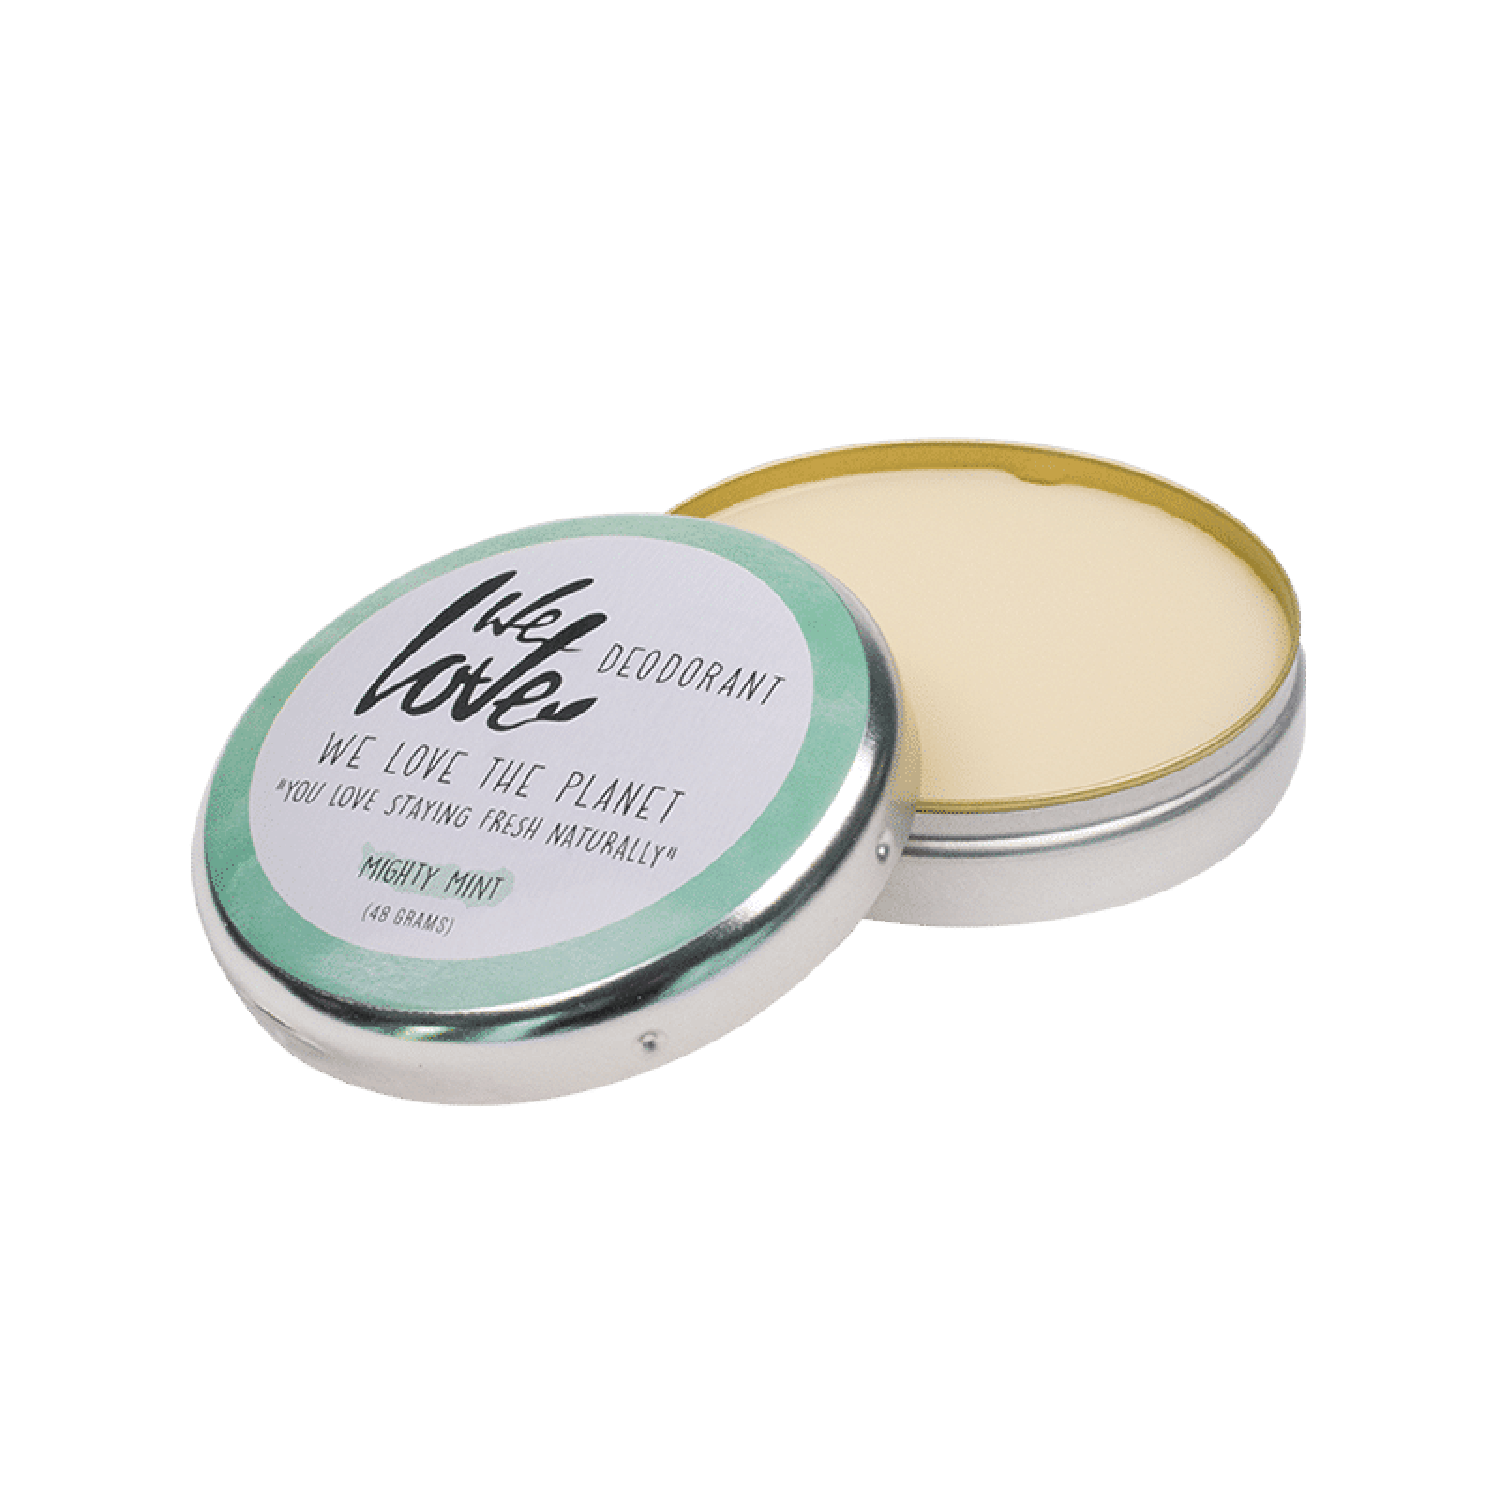 Mighty Mint Natural Deodorant Cream | We love the Planet